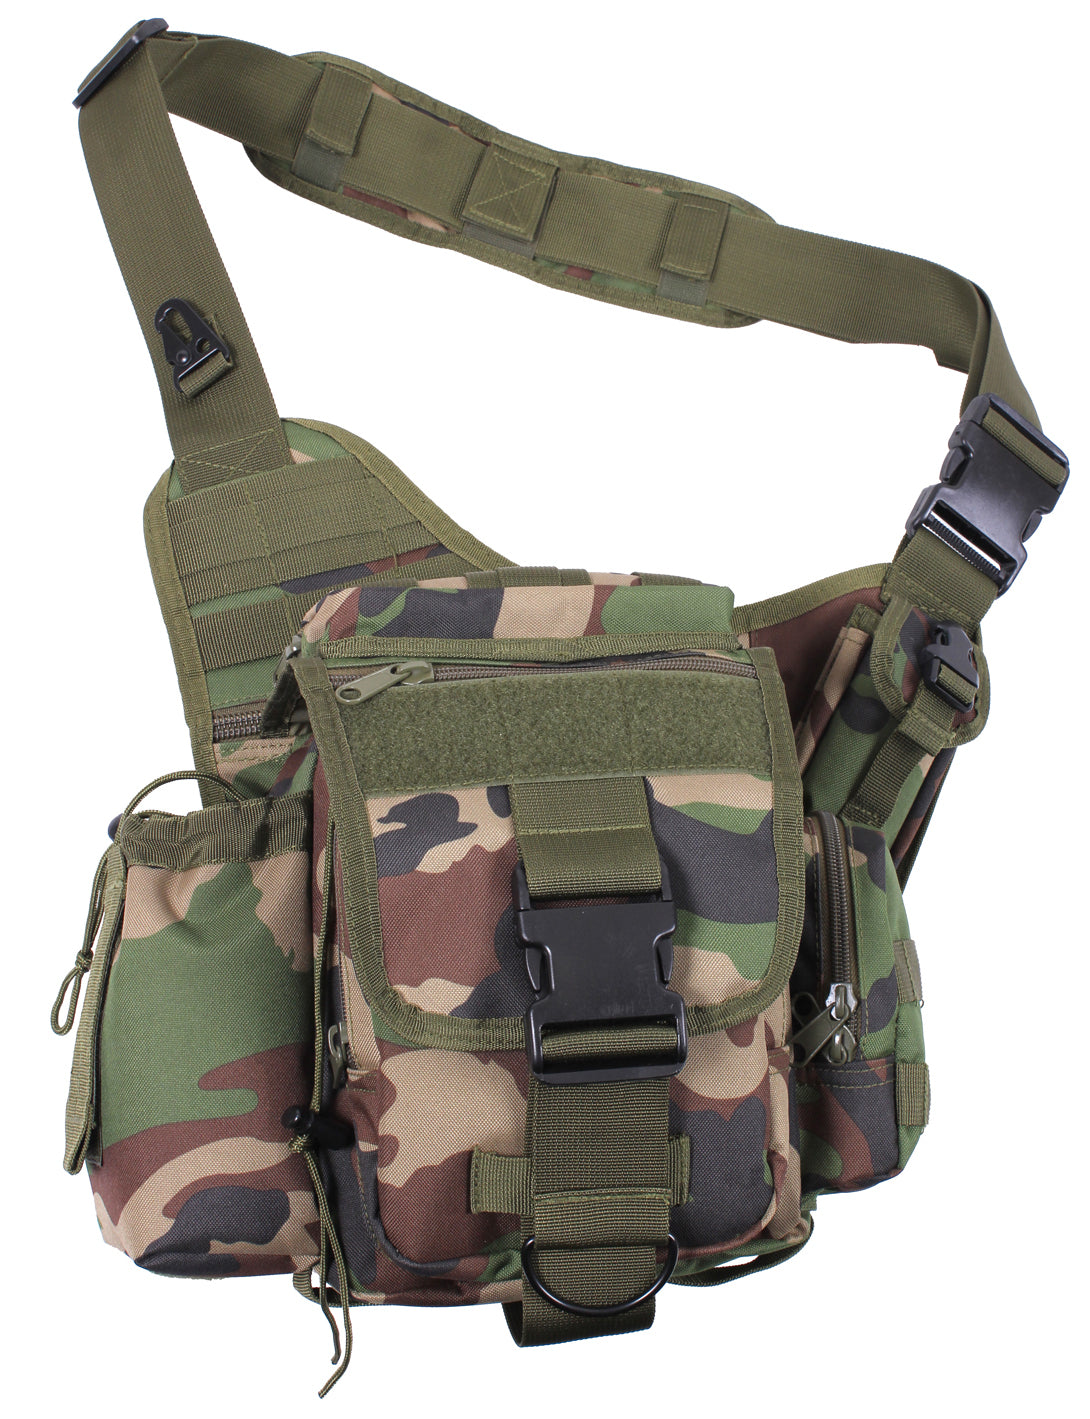 Milspec Advanced Tactical Bag Concealed Carry Bags MilTac Tactical Military Outdoor Gear Australia